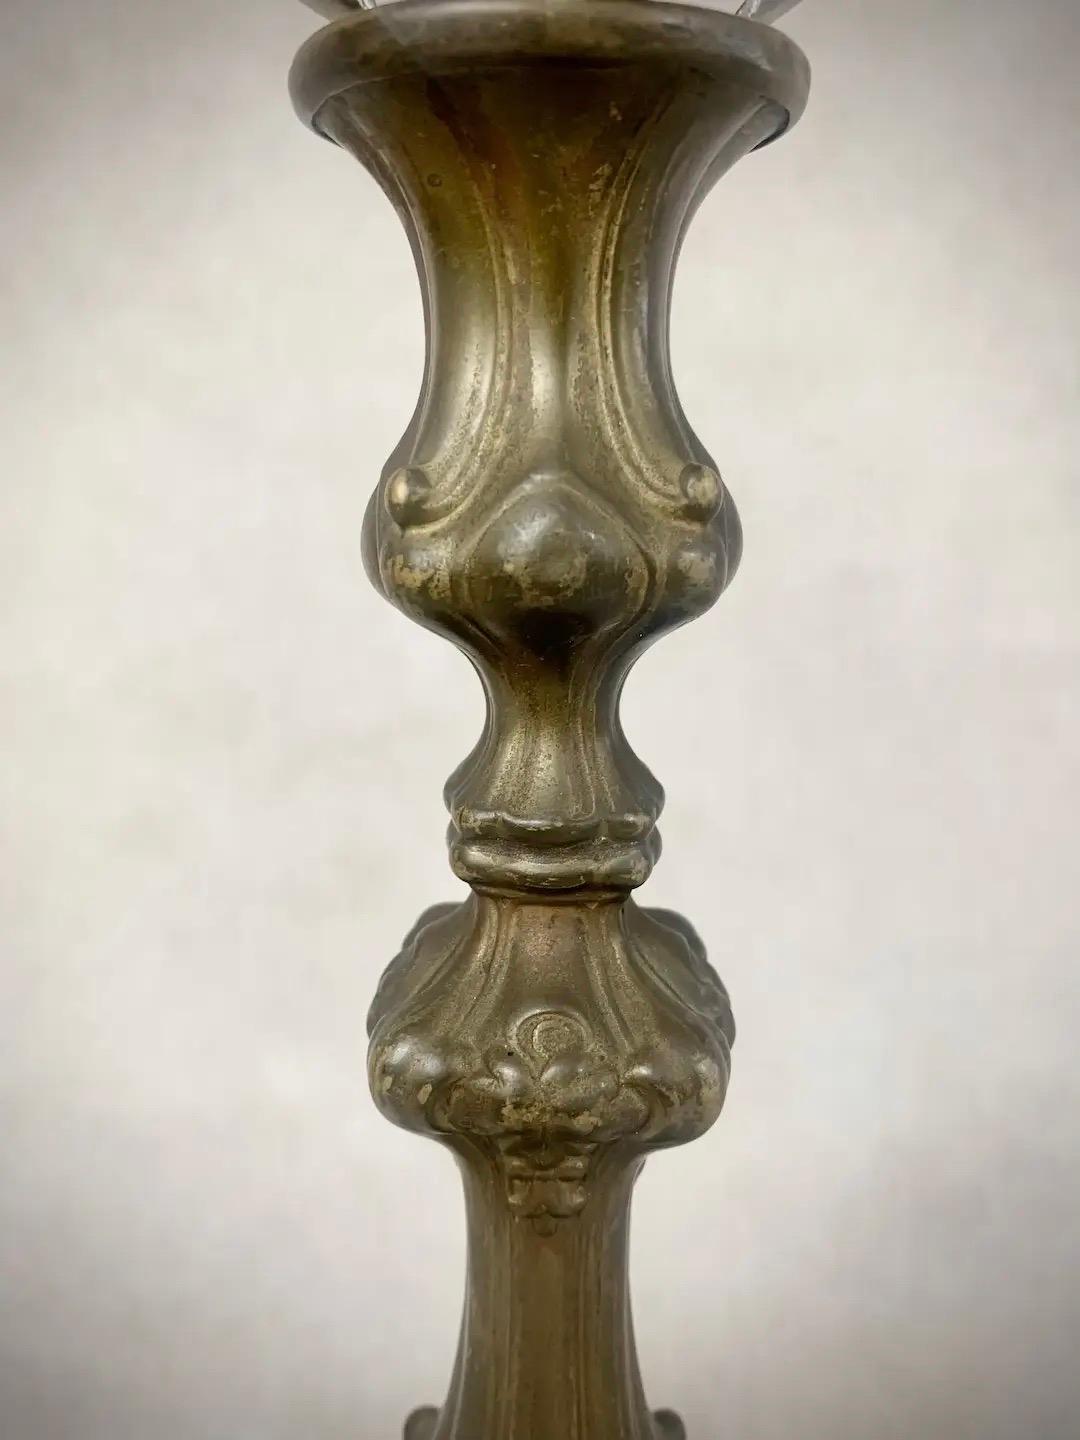 Offering a late 19th century cast brass Rococo style candlestick lamp, circa 1890-1900, featuring a scrolling column form with elaborate, symmetrical details indicative of the Victorian era. Rewired for modern electrical use in the 1950s. Made in